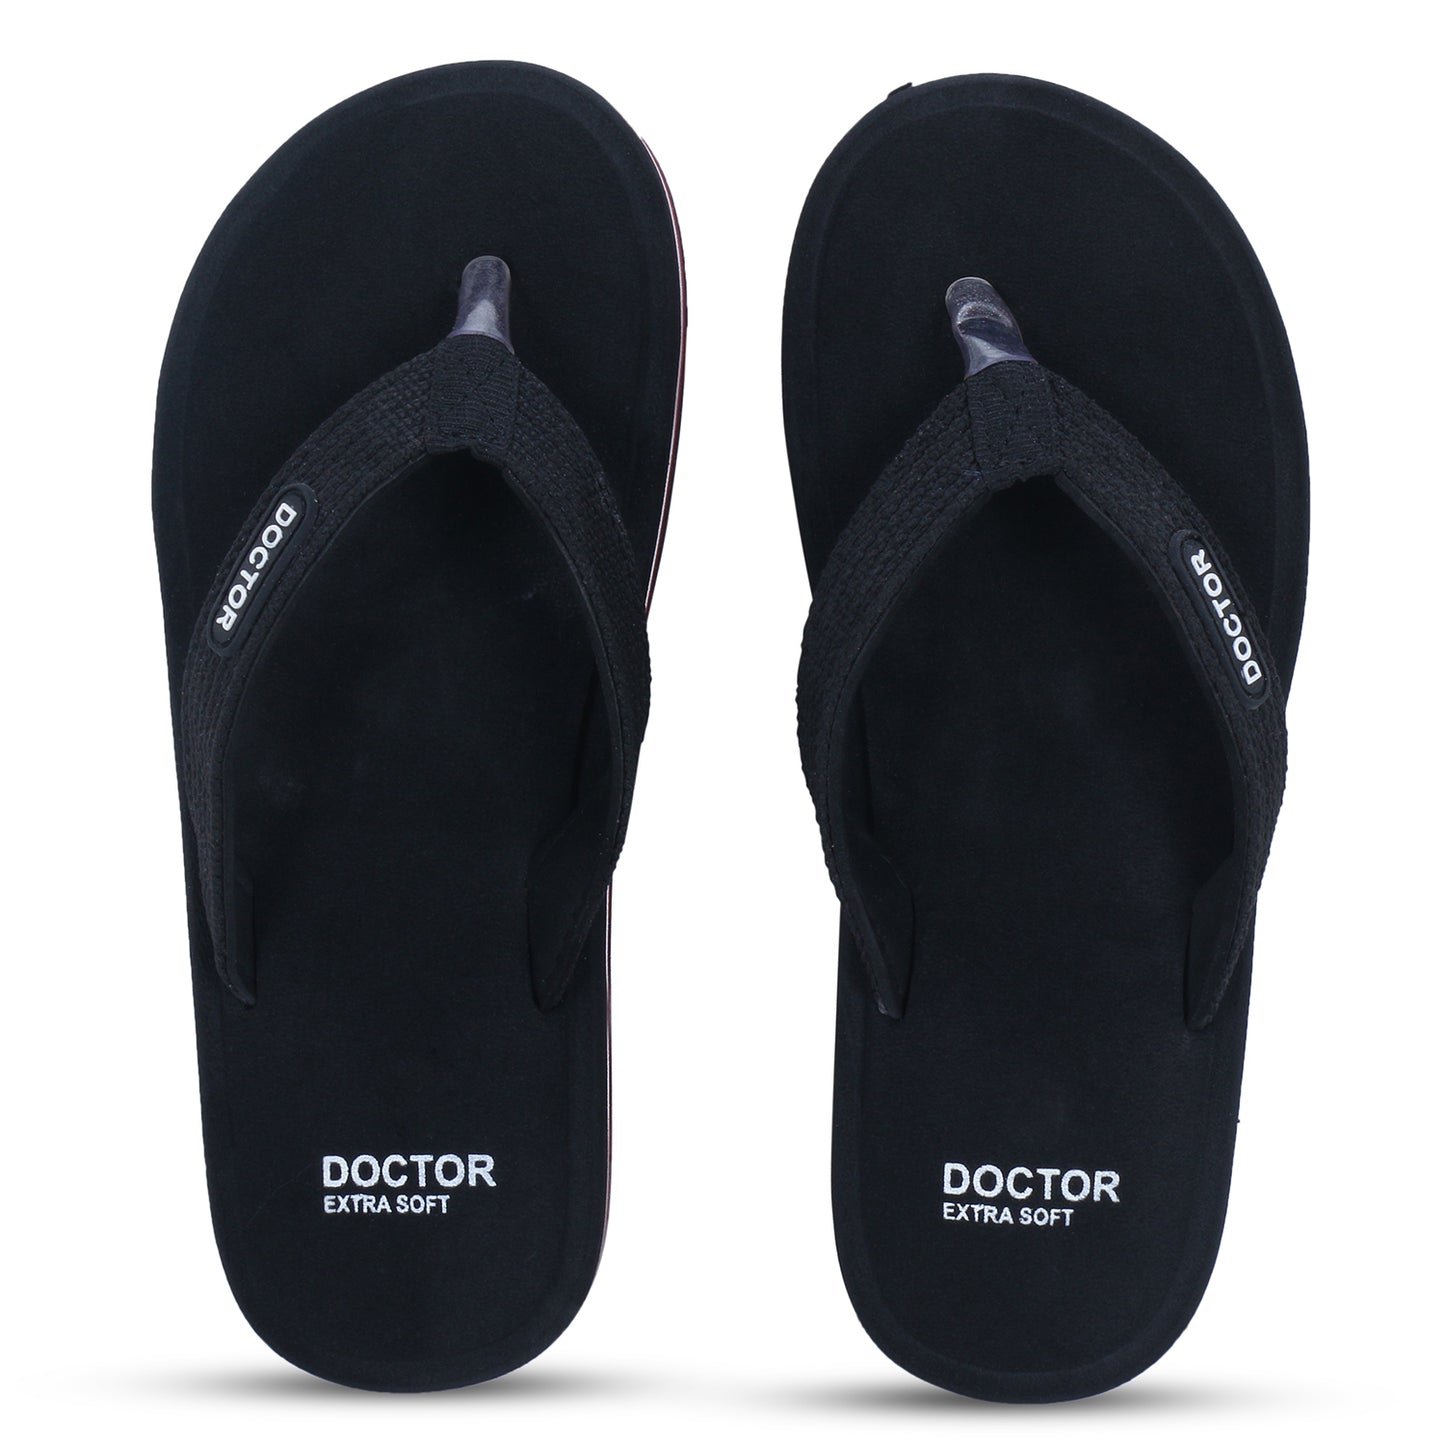 DOCTOR EXTRA SOFT D-14  Women's Flip-flop |Bounce Back Technology |Memory Foam Cushion |Comfortable Footbed for Girls & Ladies Daily Use